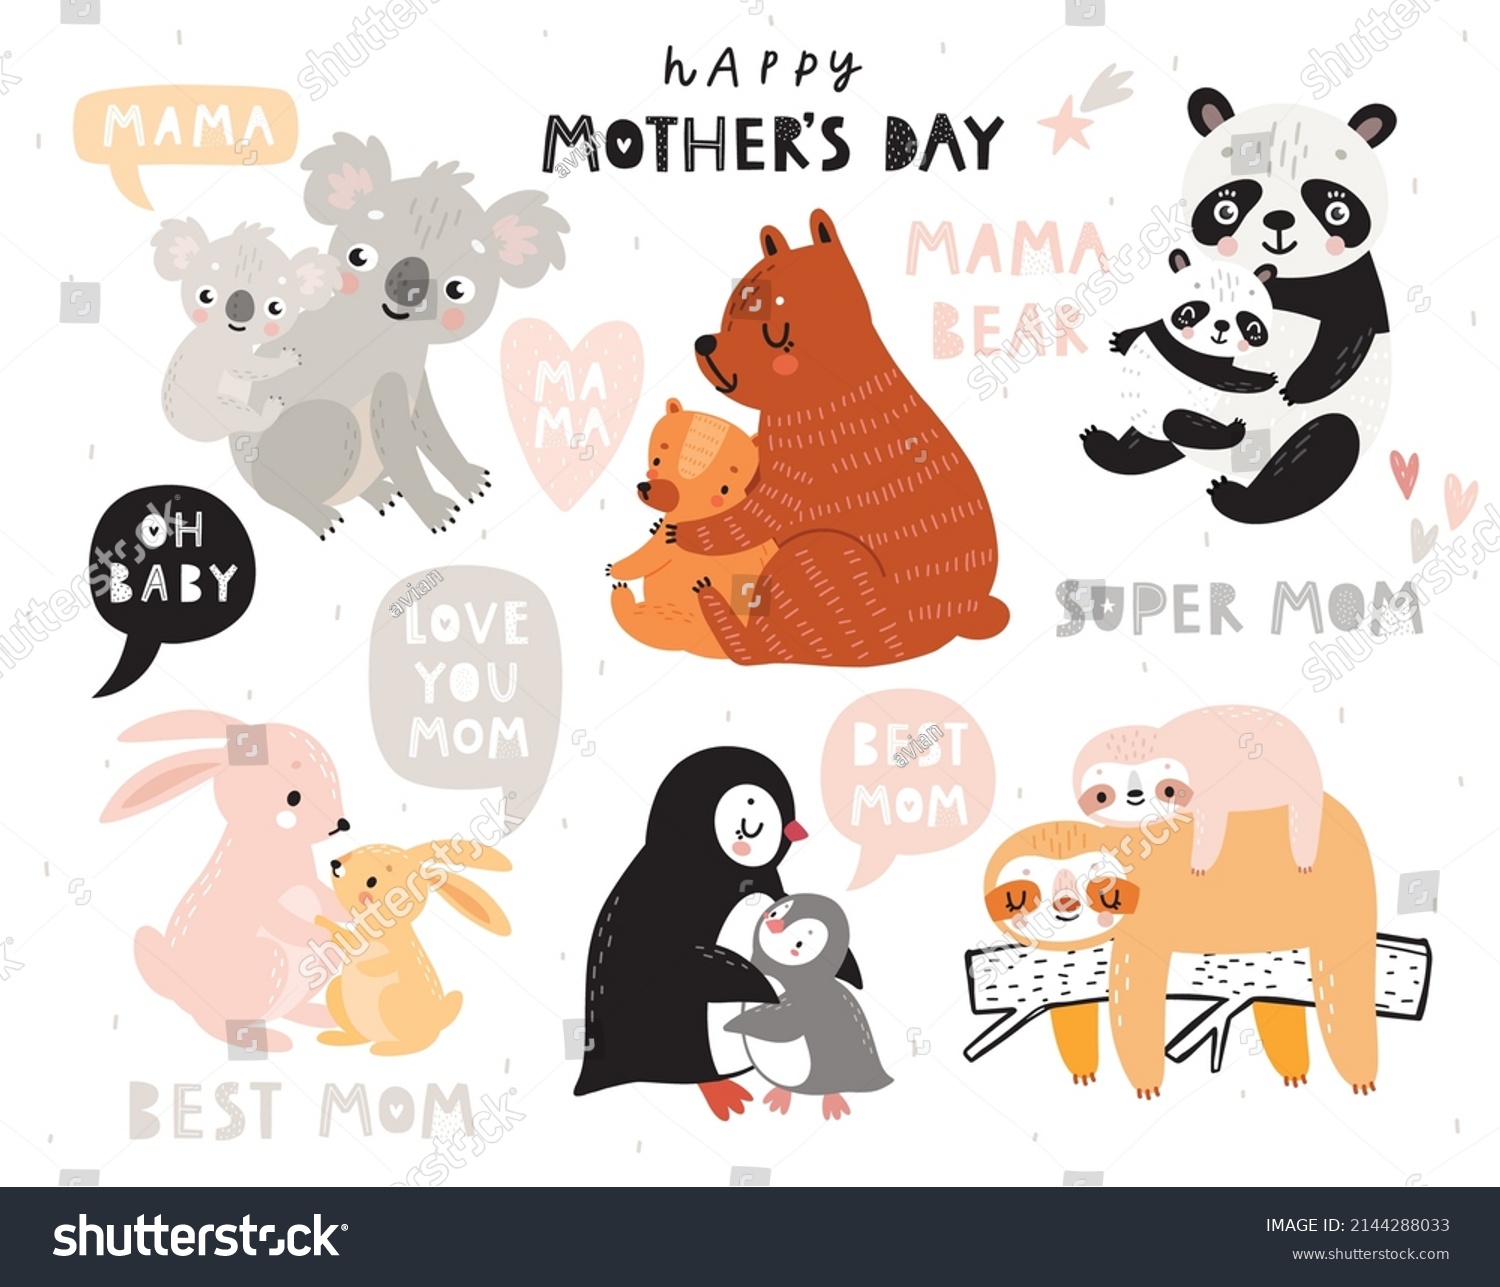 SVG of Mother's Day hand drawn style clipart. Cute animal characters - mother and baby - panda, bear, koala, sloth, penguin and rabbit.  Vector illustration. svg